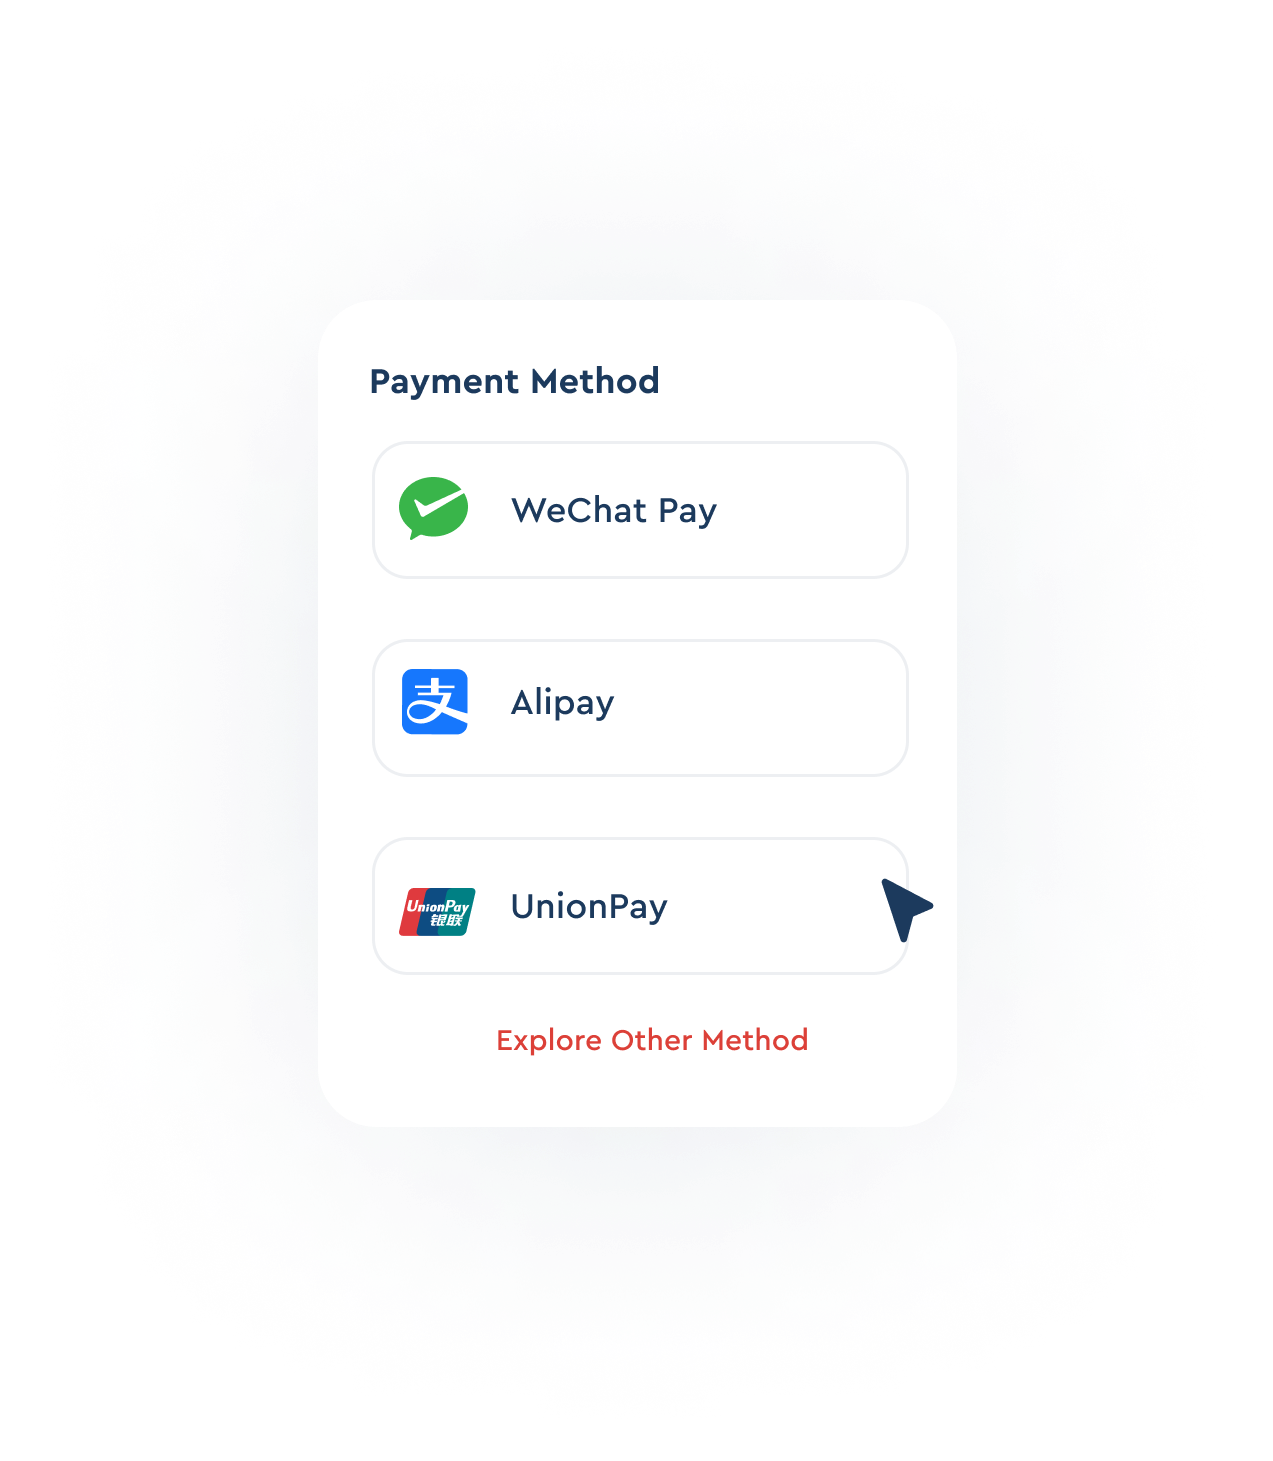 Payment_Alipay_WeChat_Pay